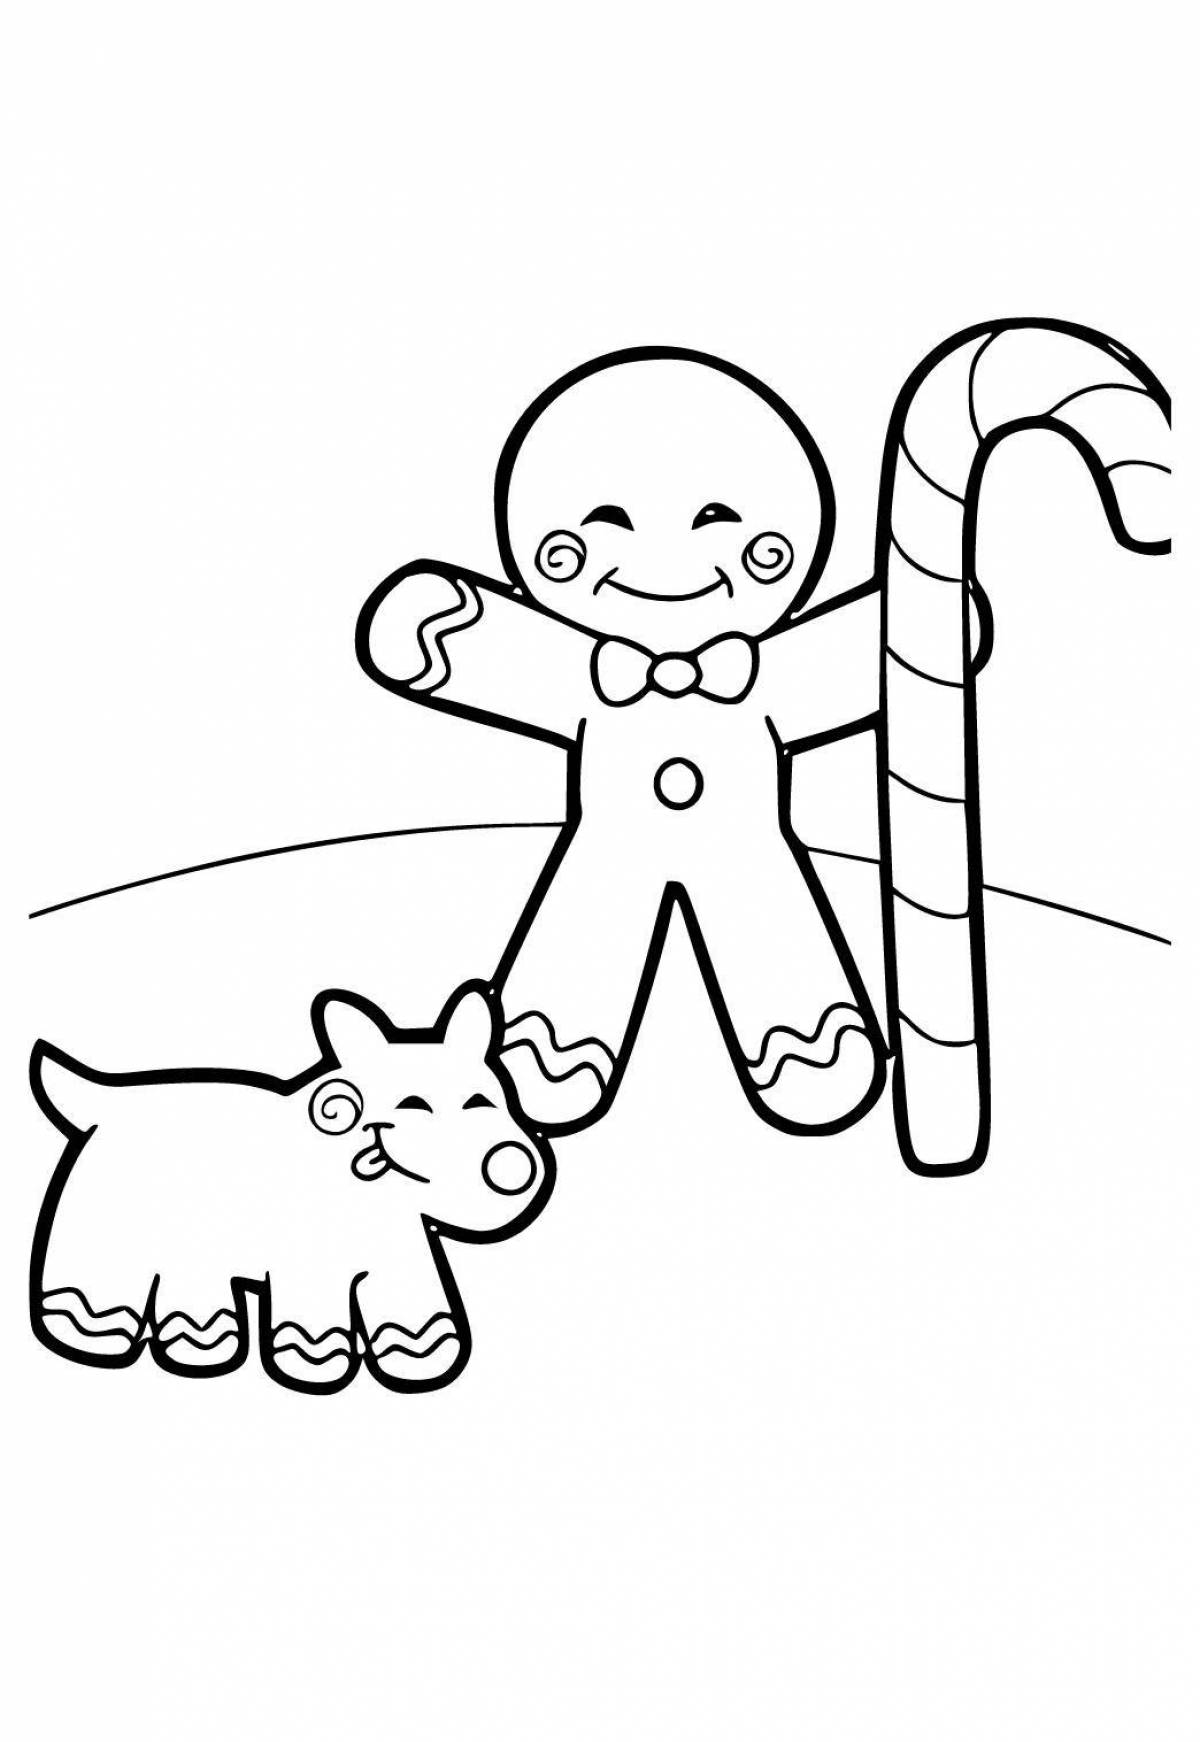 Exciting gingerbread man coloring book